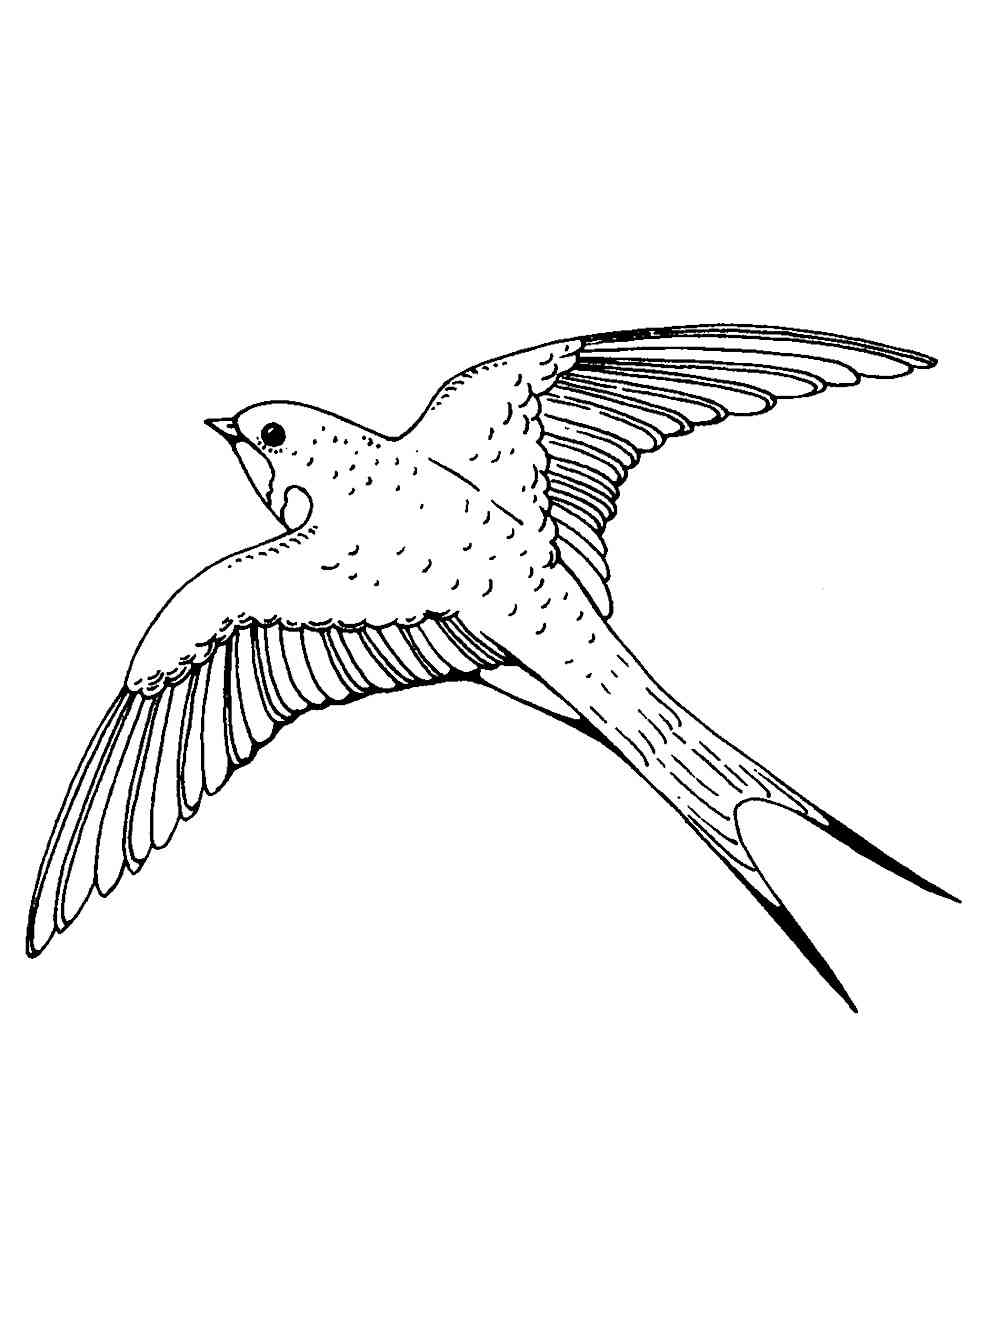 Swallow coloring pages. Download and print Swallow coloring pages